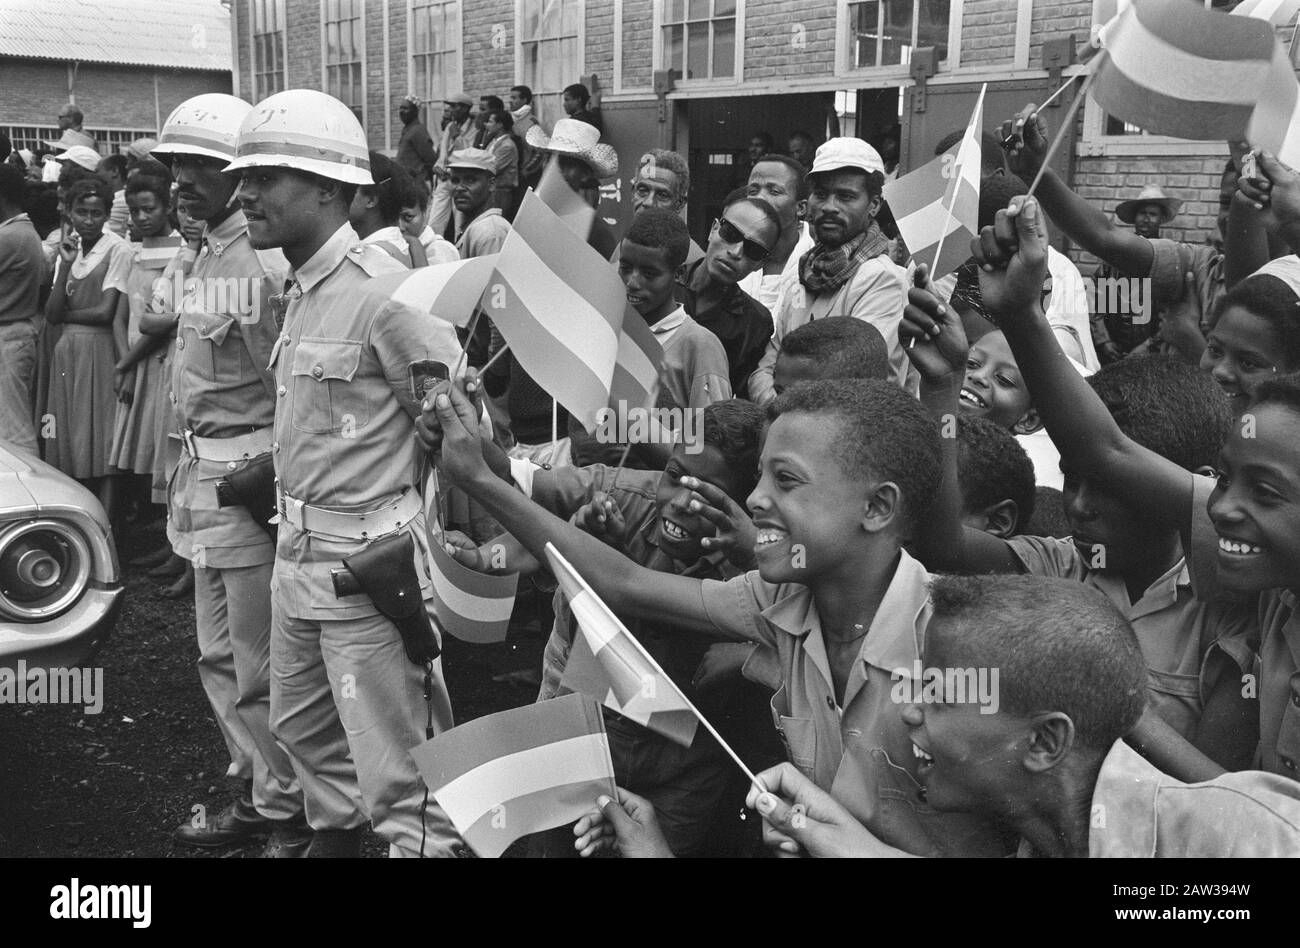 Royal family in Ethiopia # 21., 22: Ethiopian soldiers, No. 23A:. Jubilant Ethiopian children waving flags Date: January 28, 1969 Location: Ethiopia Keywords: children, SOLDIERS, families, flags Stock Photo